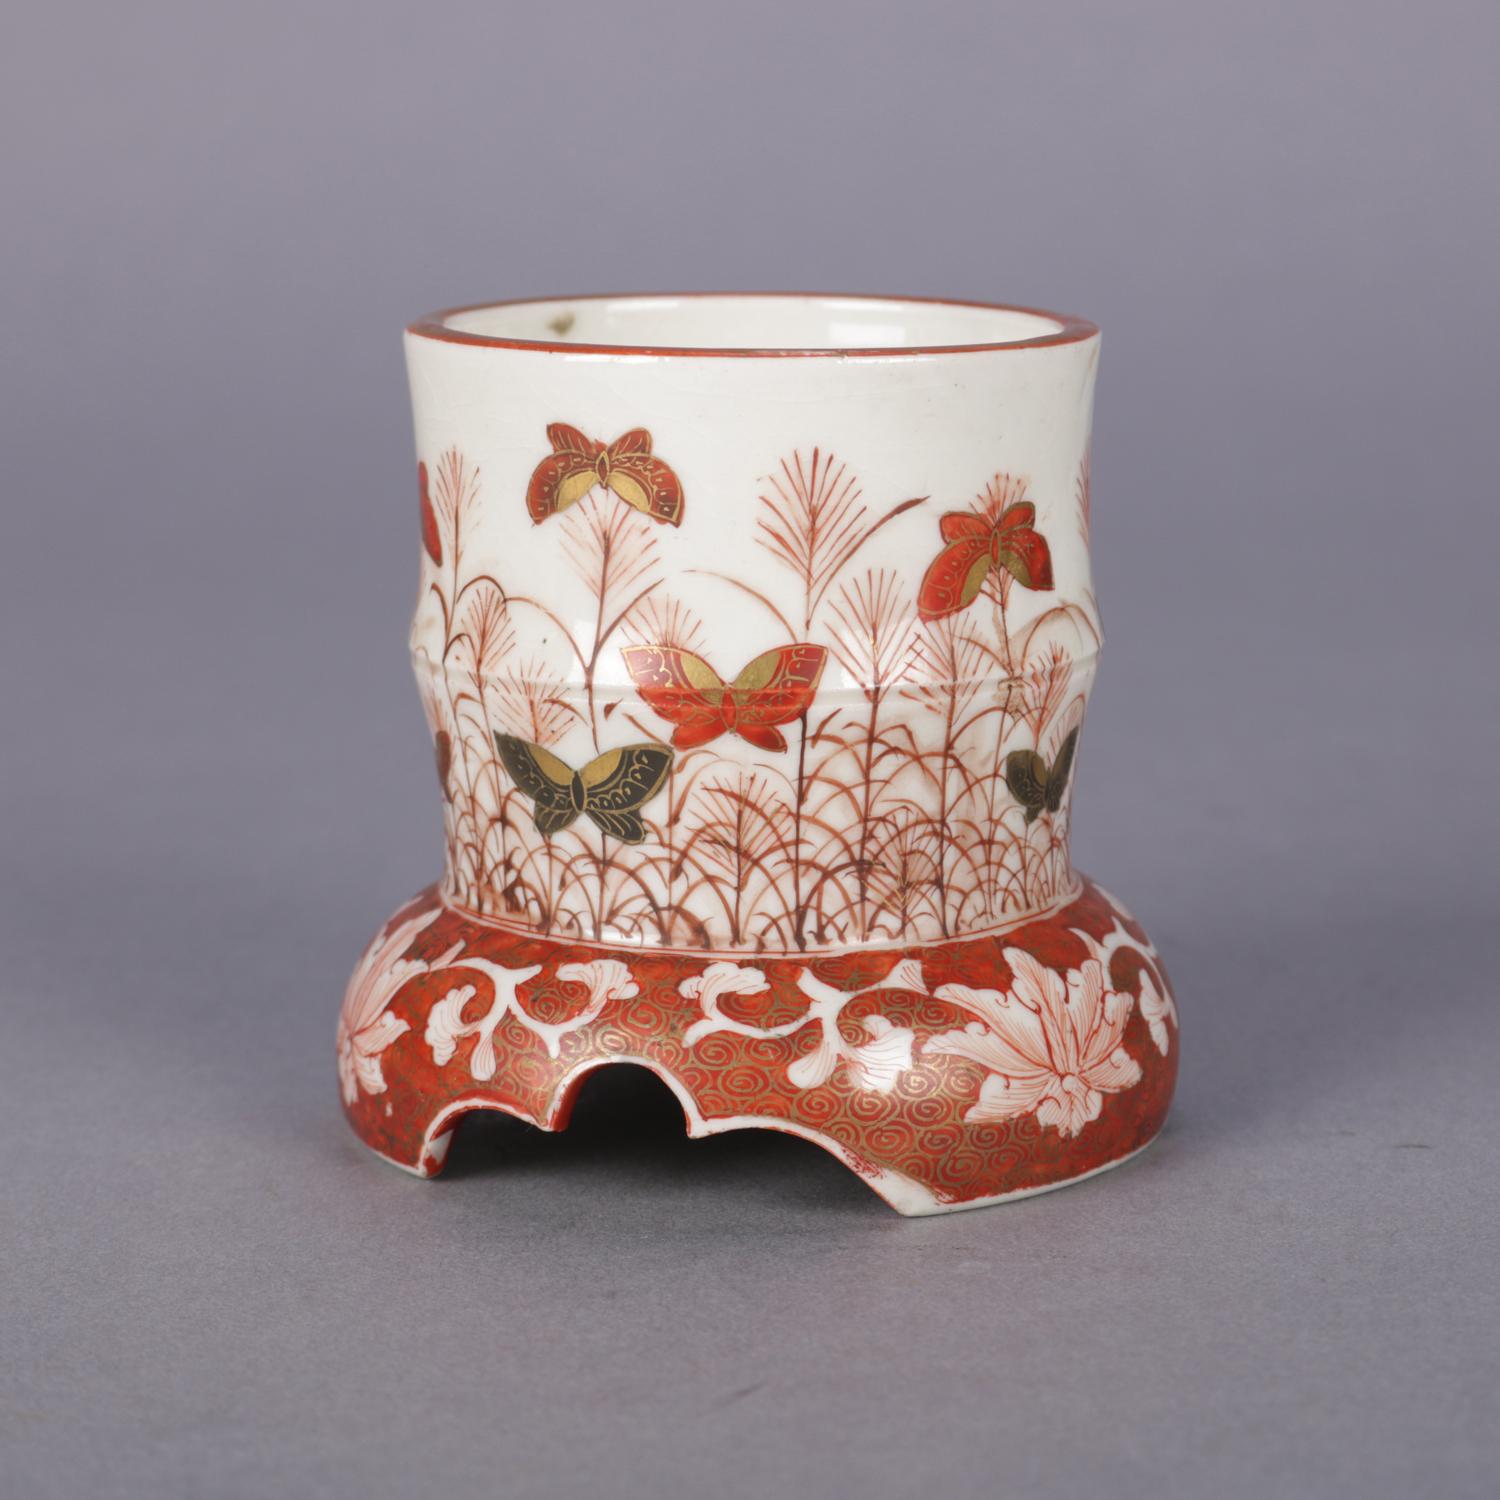 An antique Japanese Imari Porcelain brush wash features cylindrical form with hand painted butterfly garden scene and having gilt scroll highlights, chop mark signed on base, circa 1900

Measures: 3.25